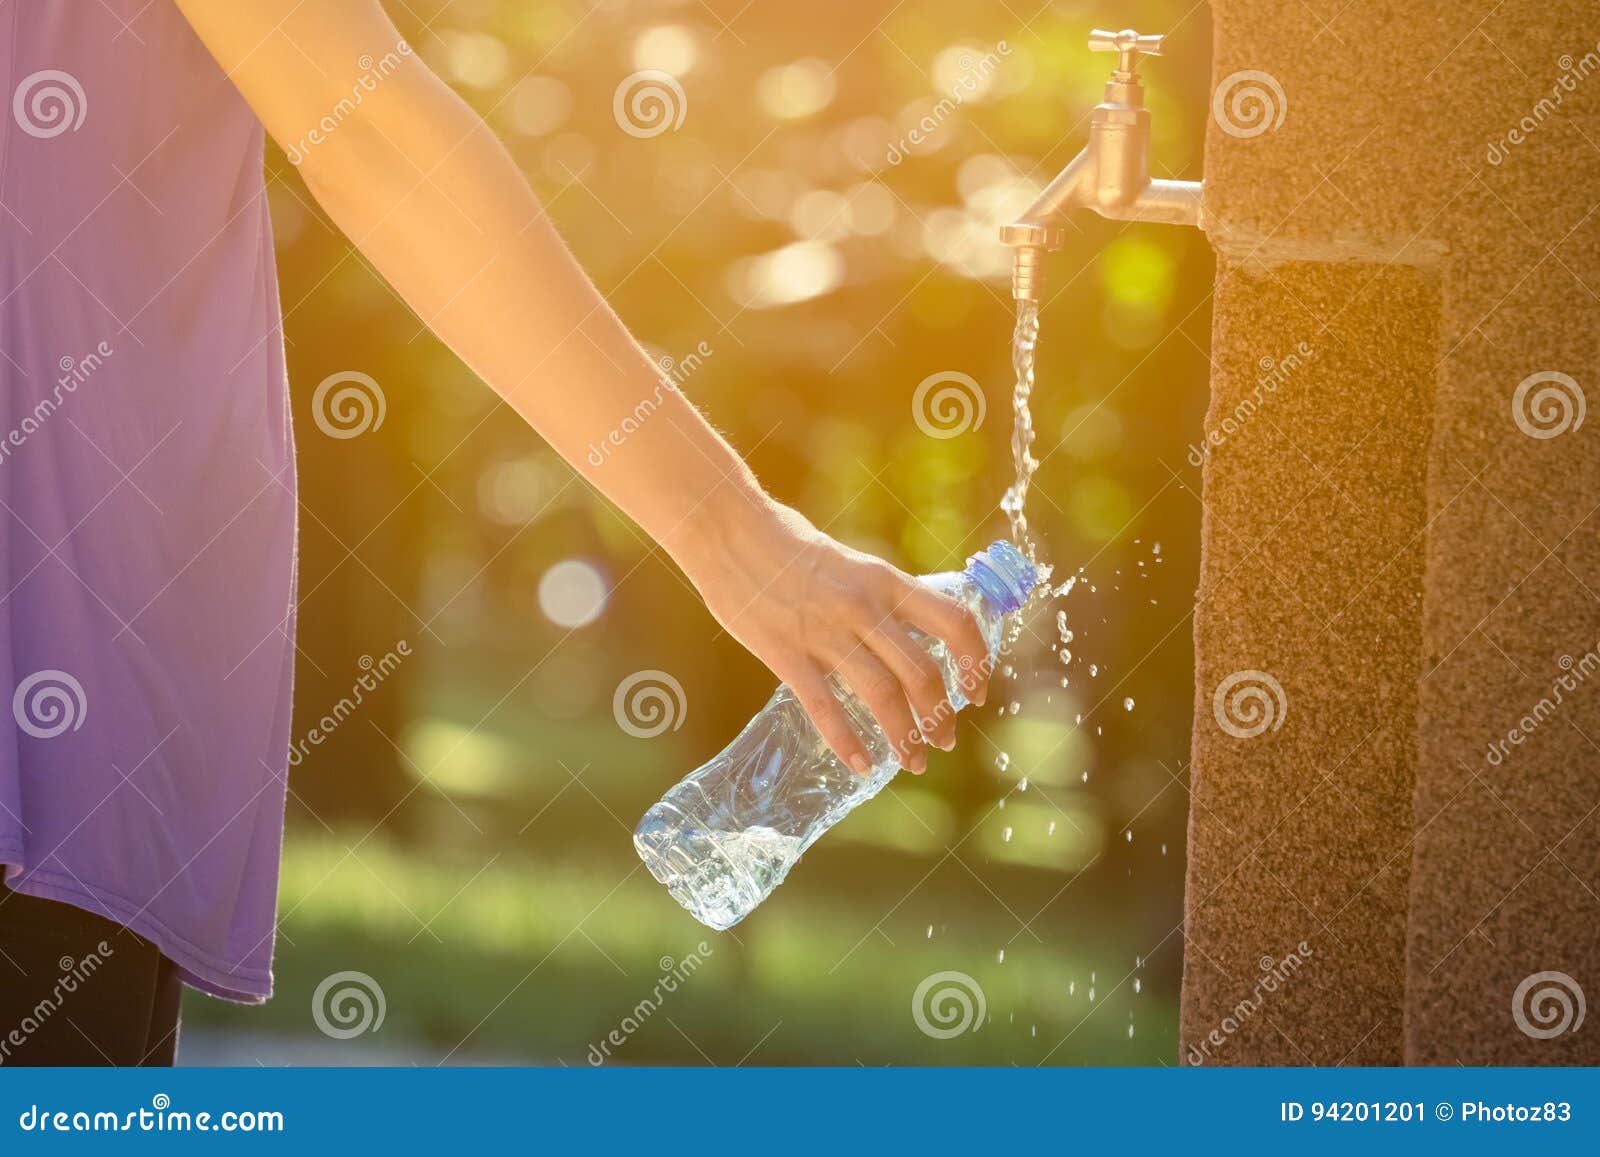 Female Pouring Water On Outdoor Faucet Stock Image Image Of